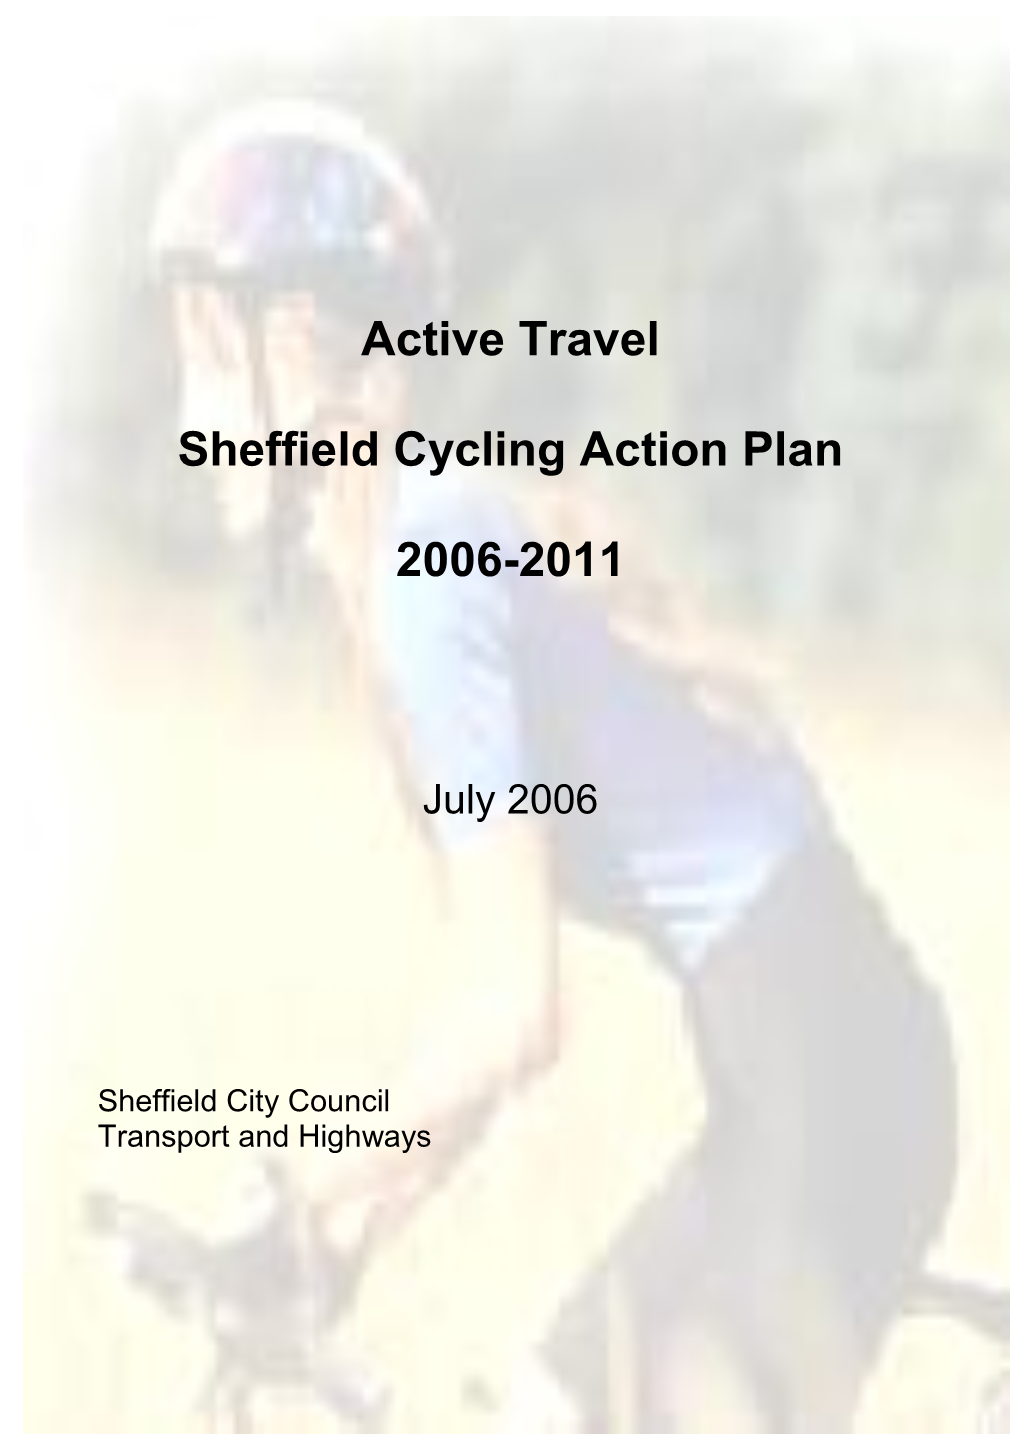 Active Travel Sheffield Cycling Action Plan 2006-2011